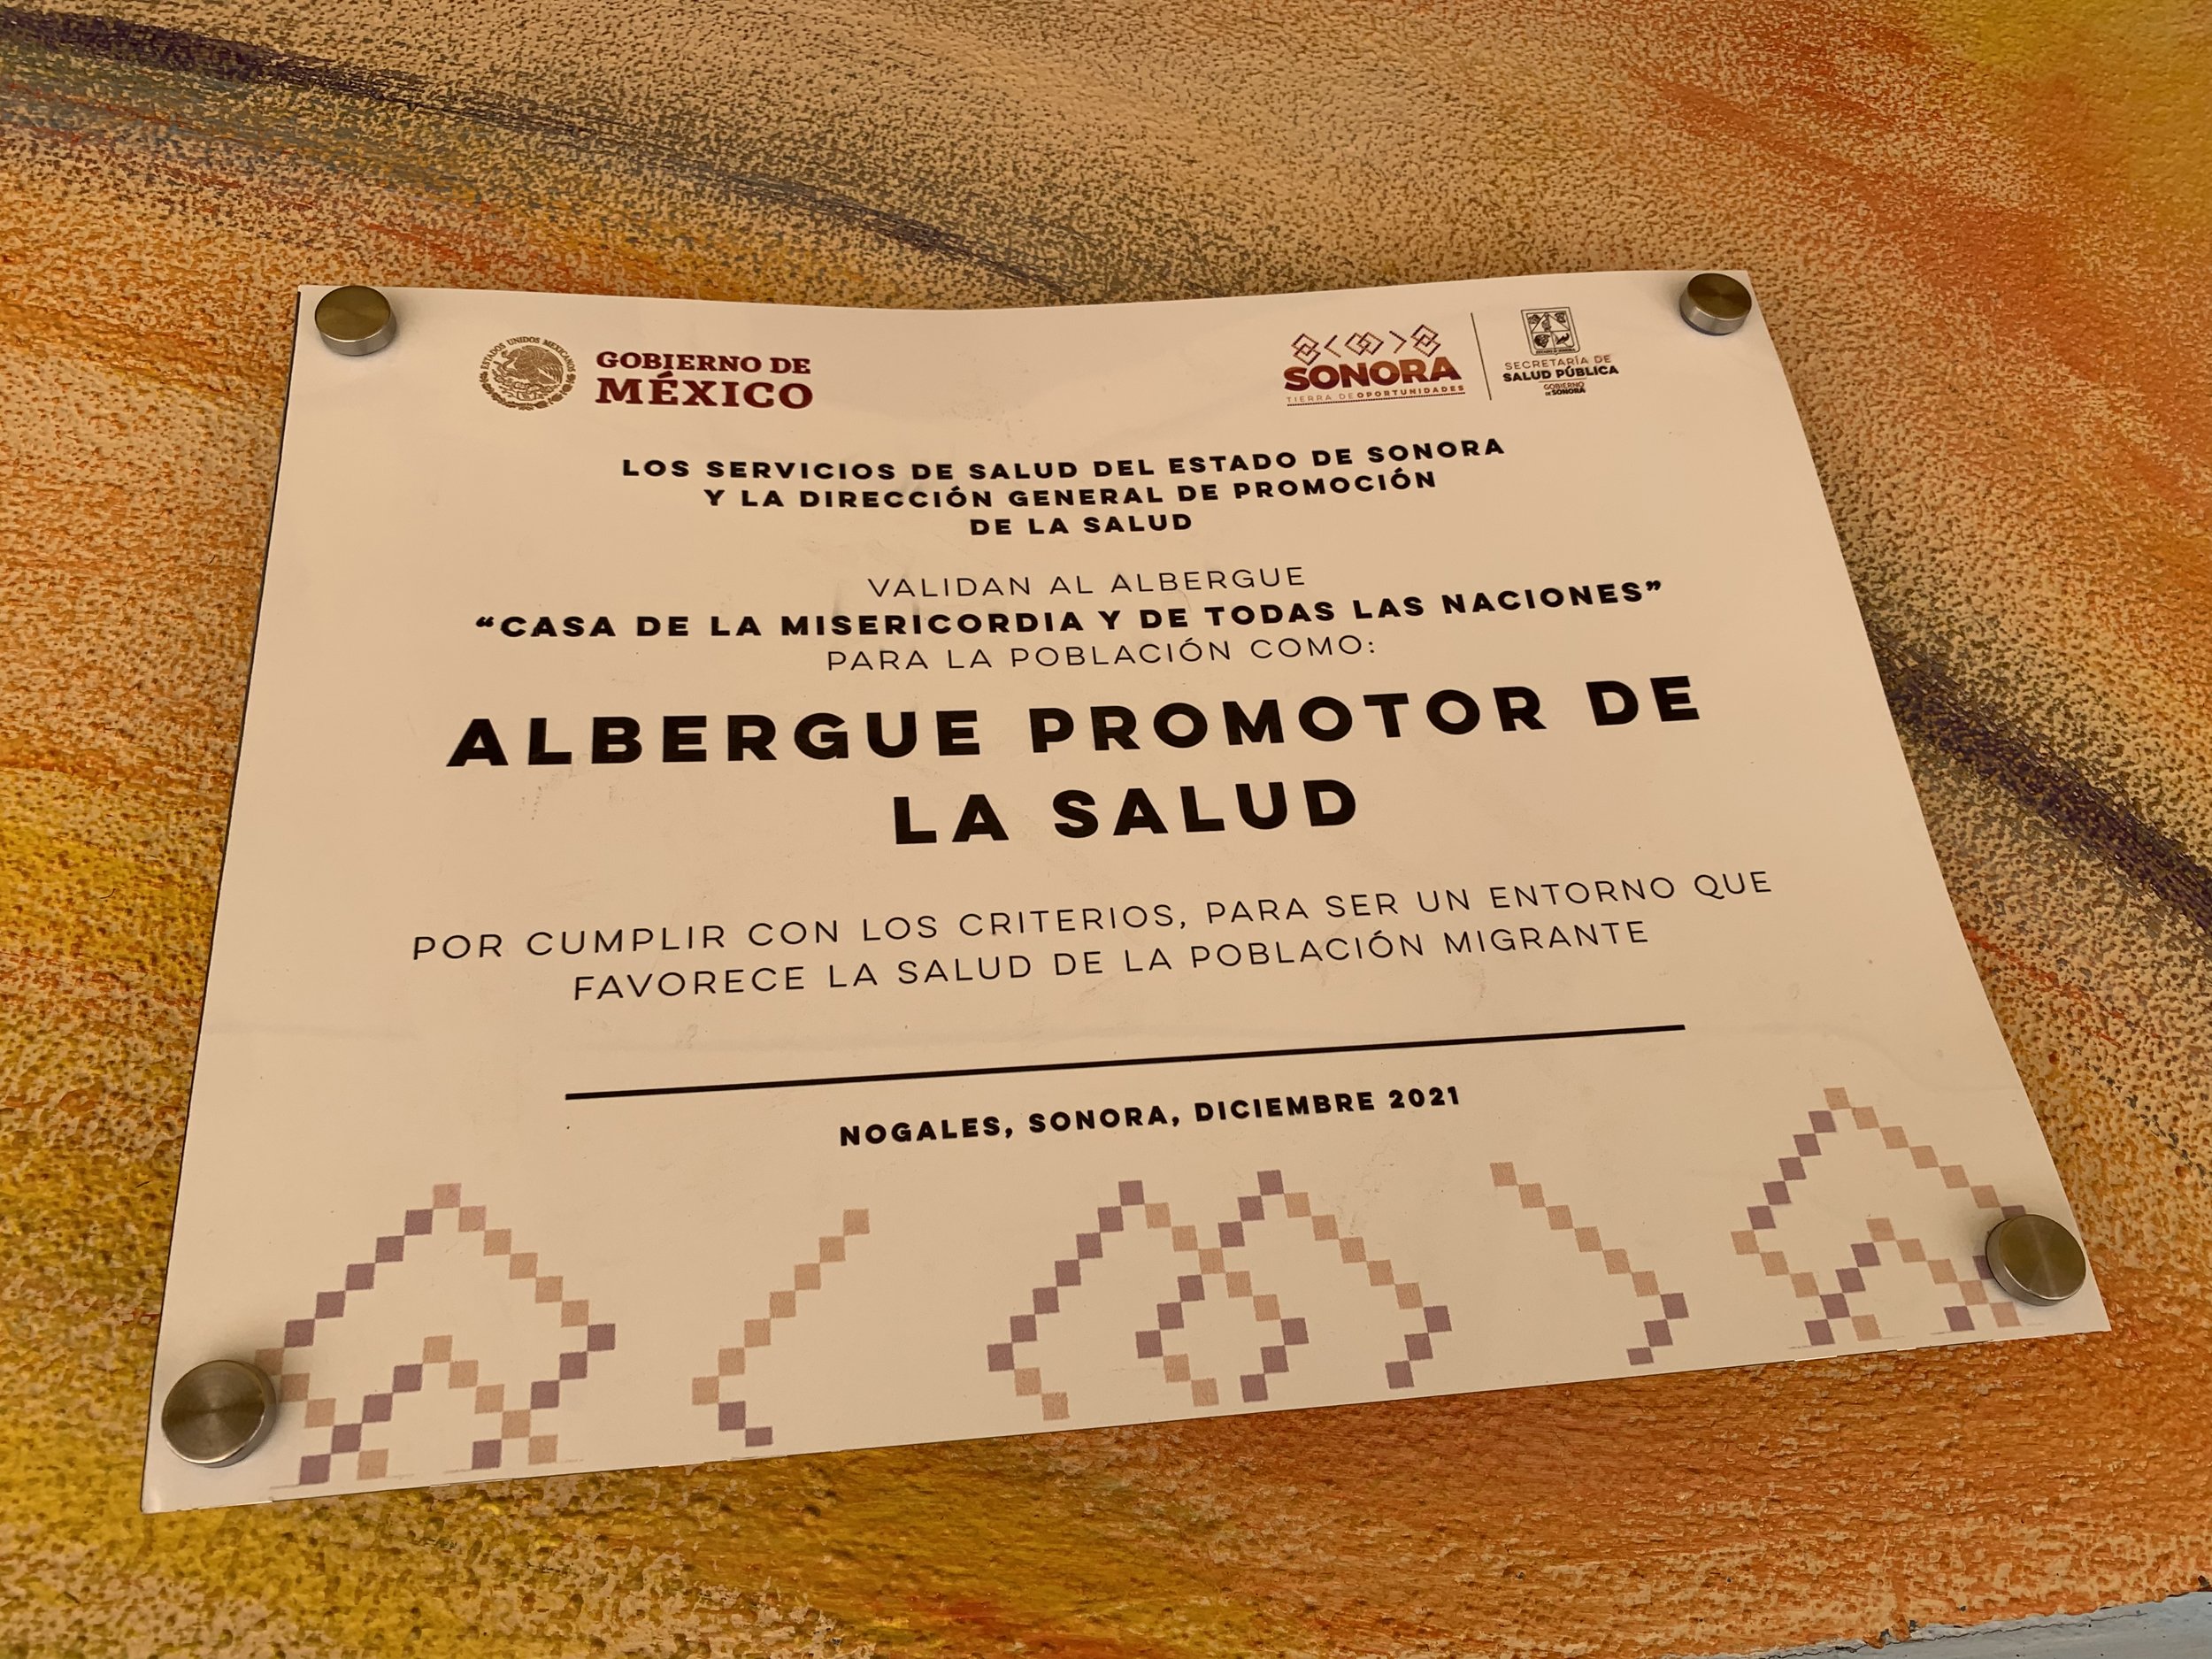  Certificate proclaiming the organization as a health-promoting hostel for meeting the criteria to be an environment that favors the health of the migrant population. 